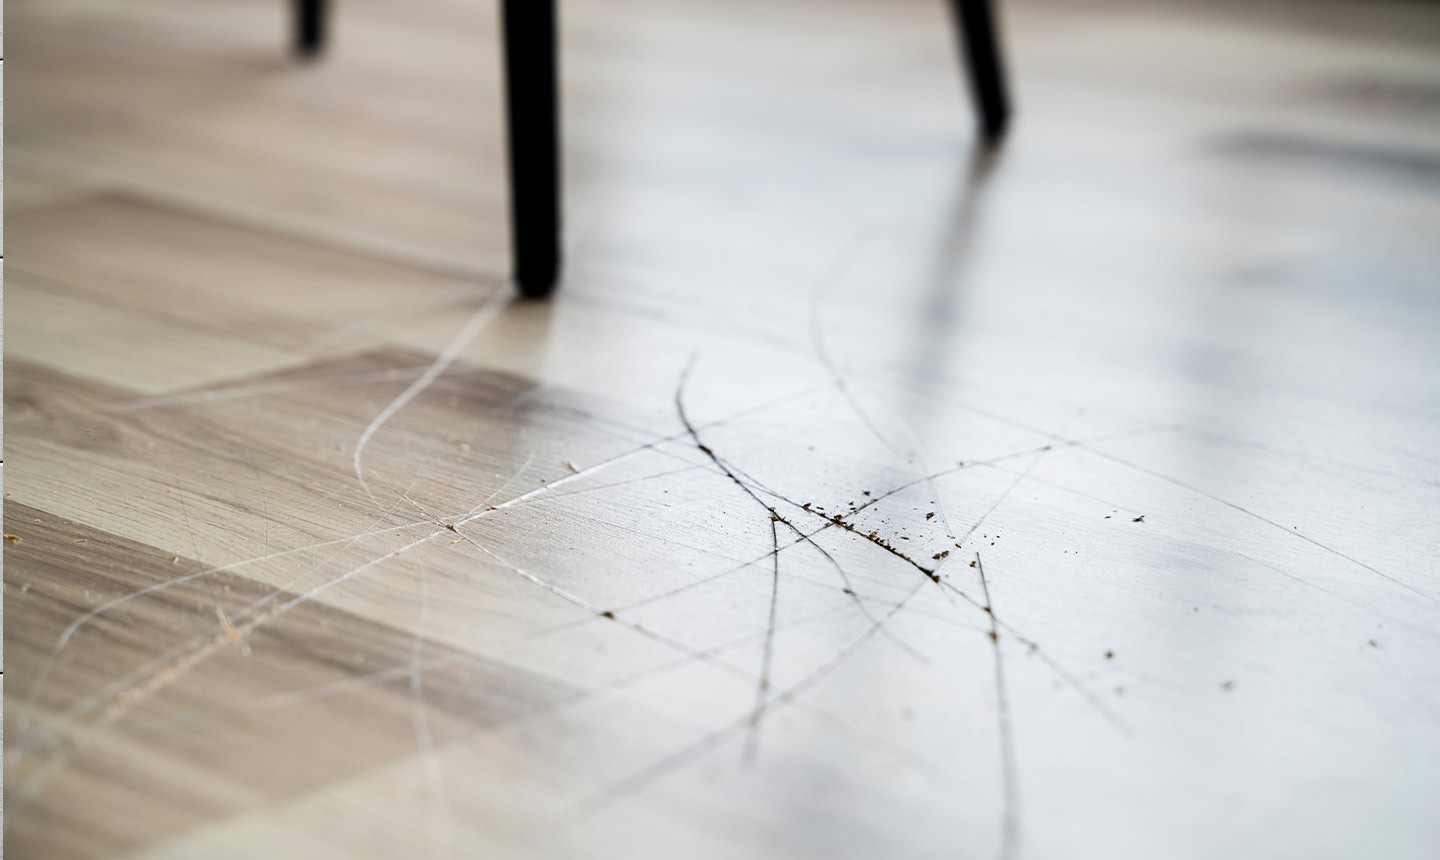 Repair scratches on cold and porous floors